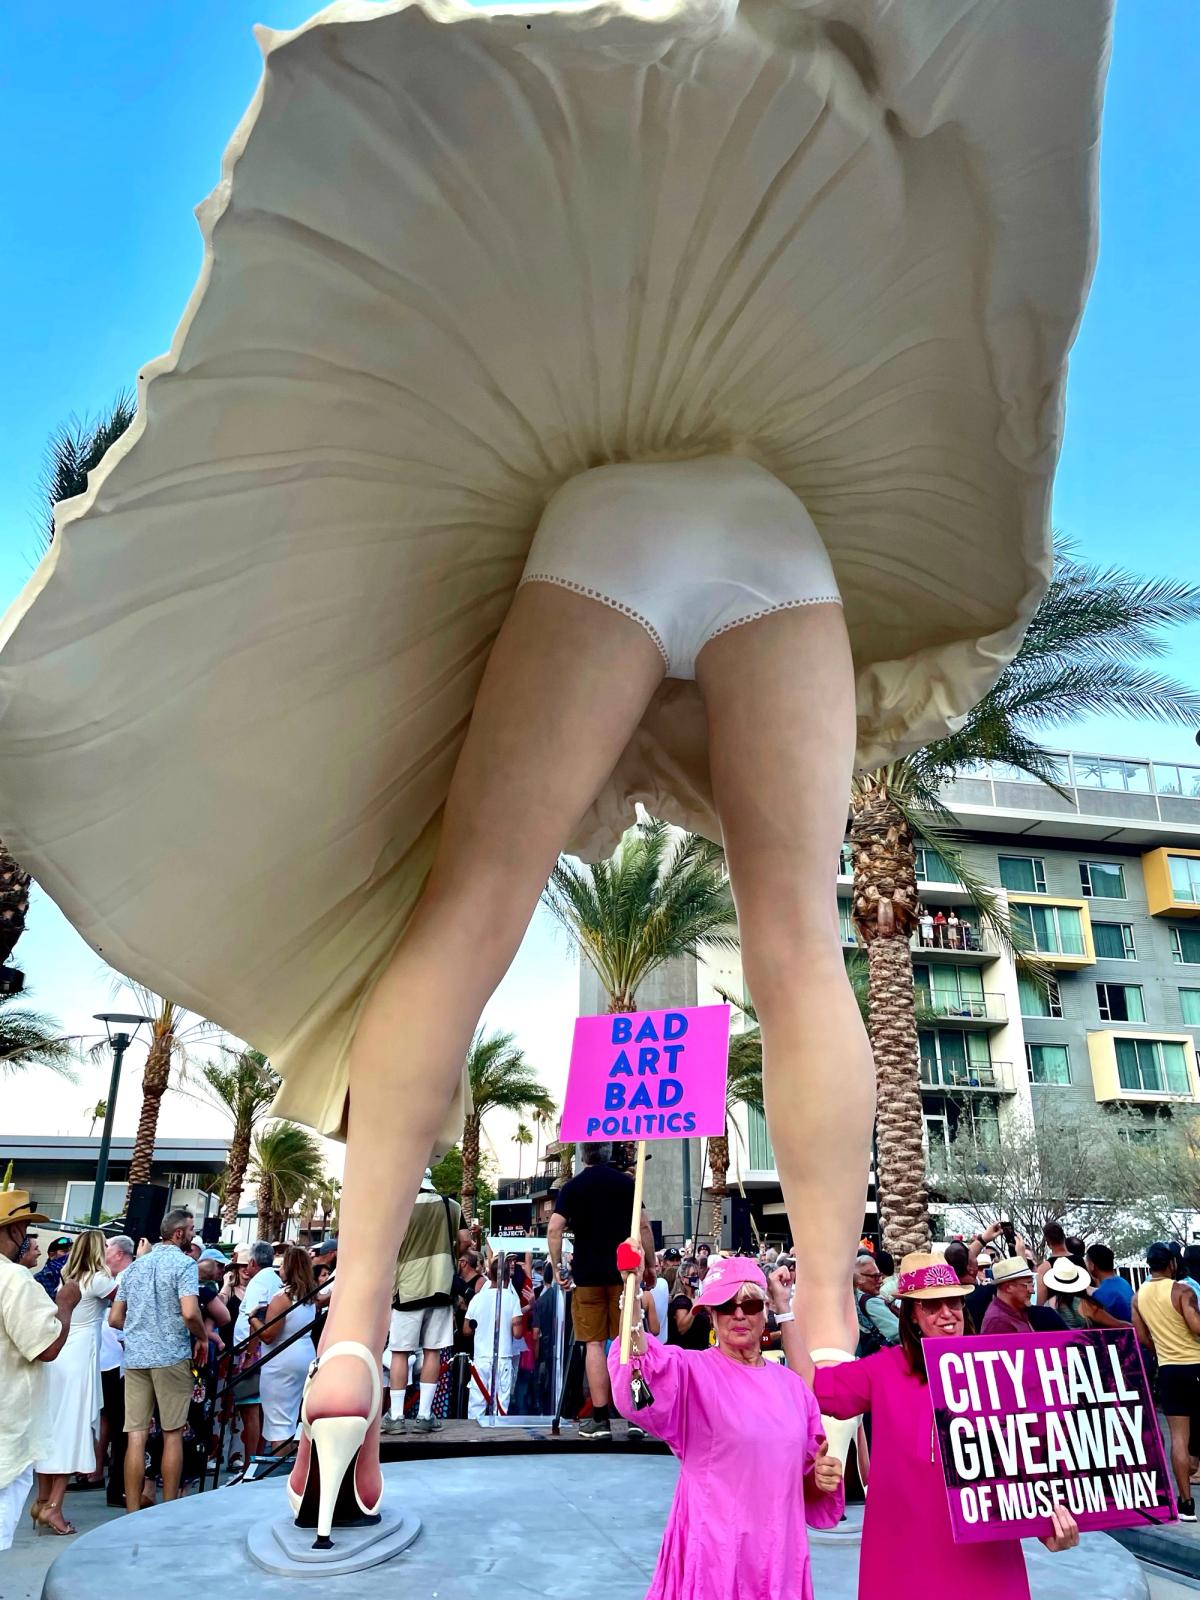 Huge Marilyn Monroe statue draws protest in Palm Springs – East Bay Times